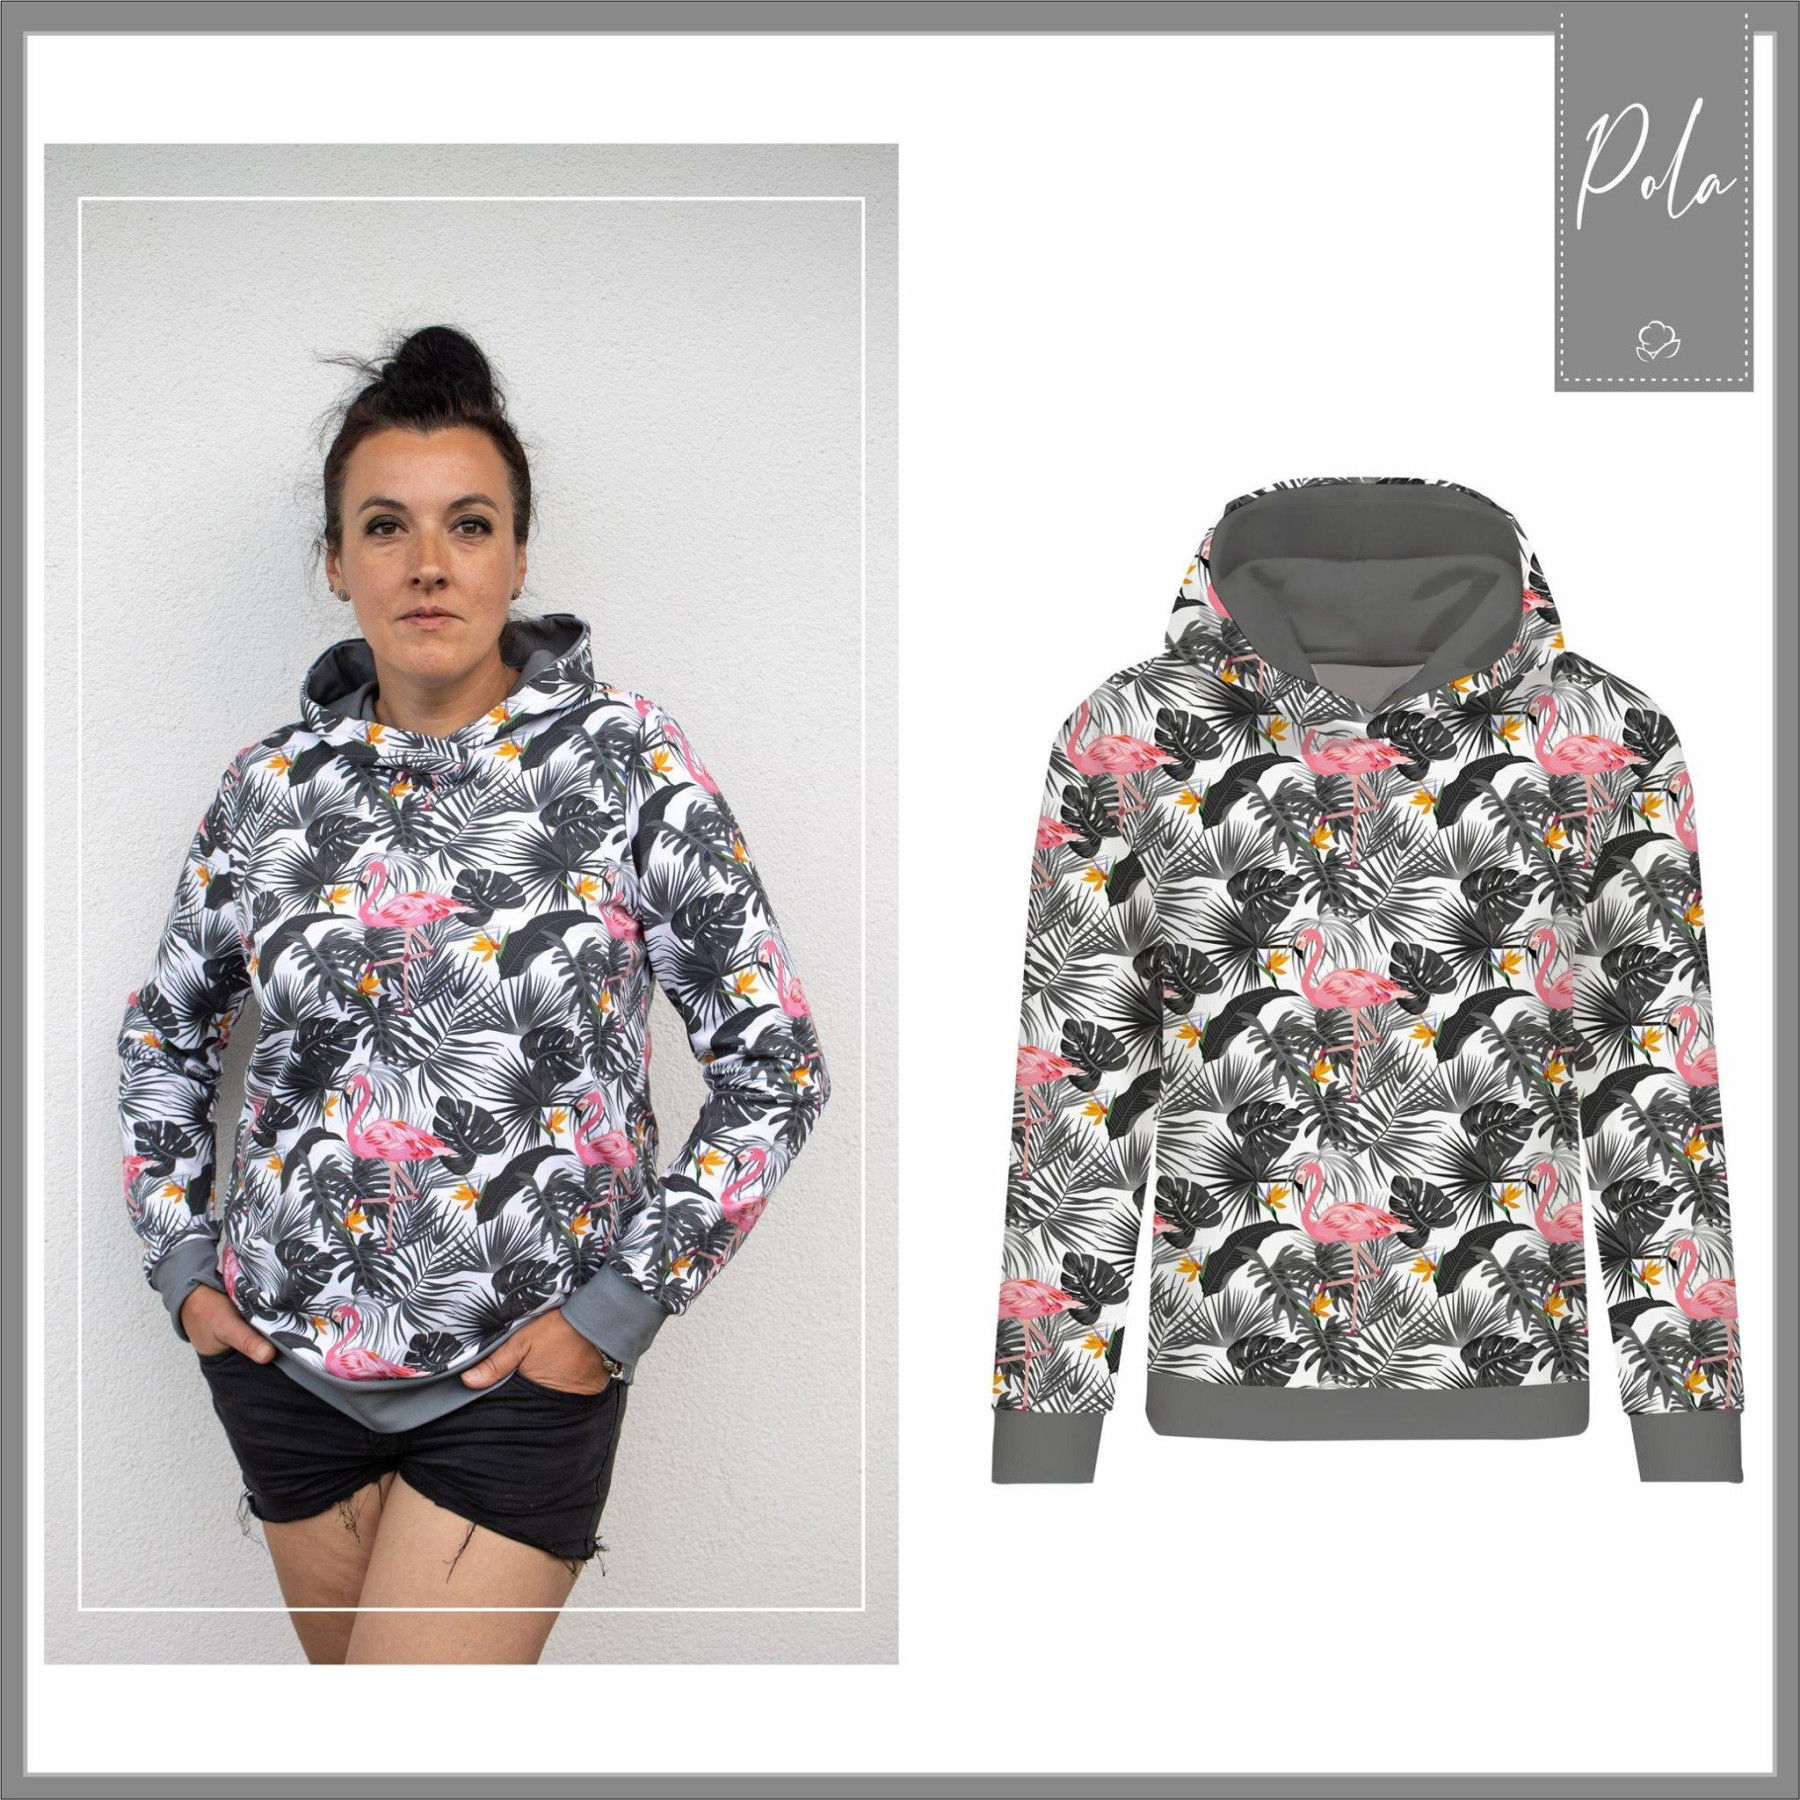 PAPER SEWING PATTERN - CLASSIC WOMEN’S HOODIE (POLA)